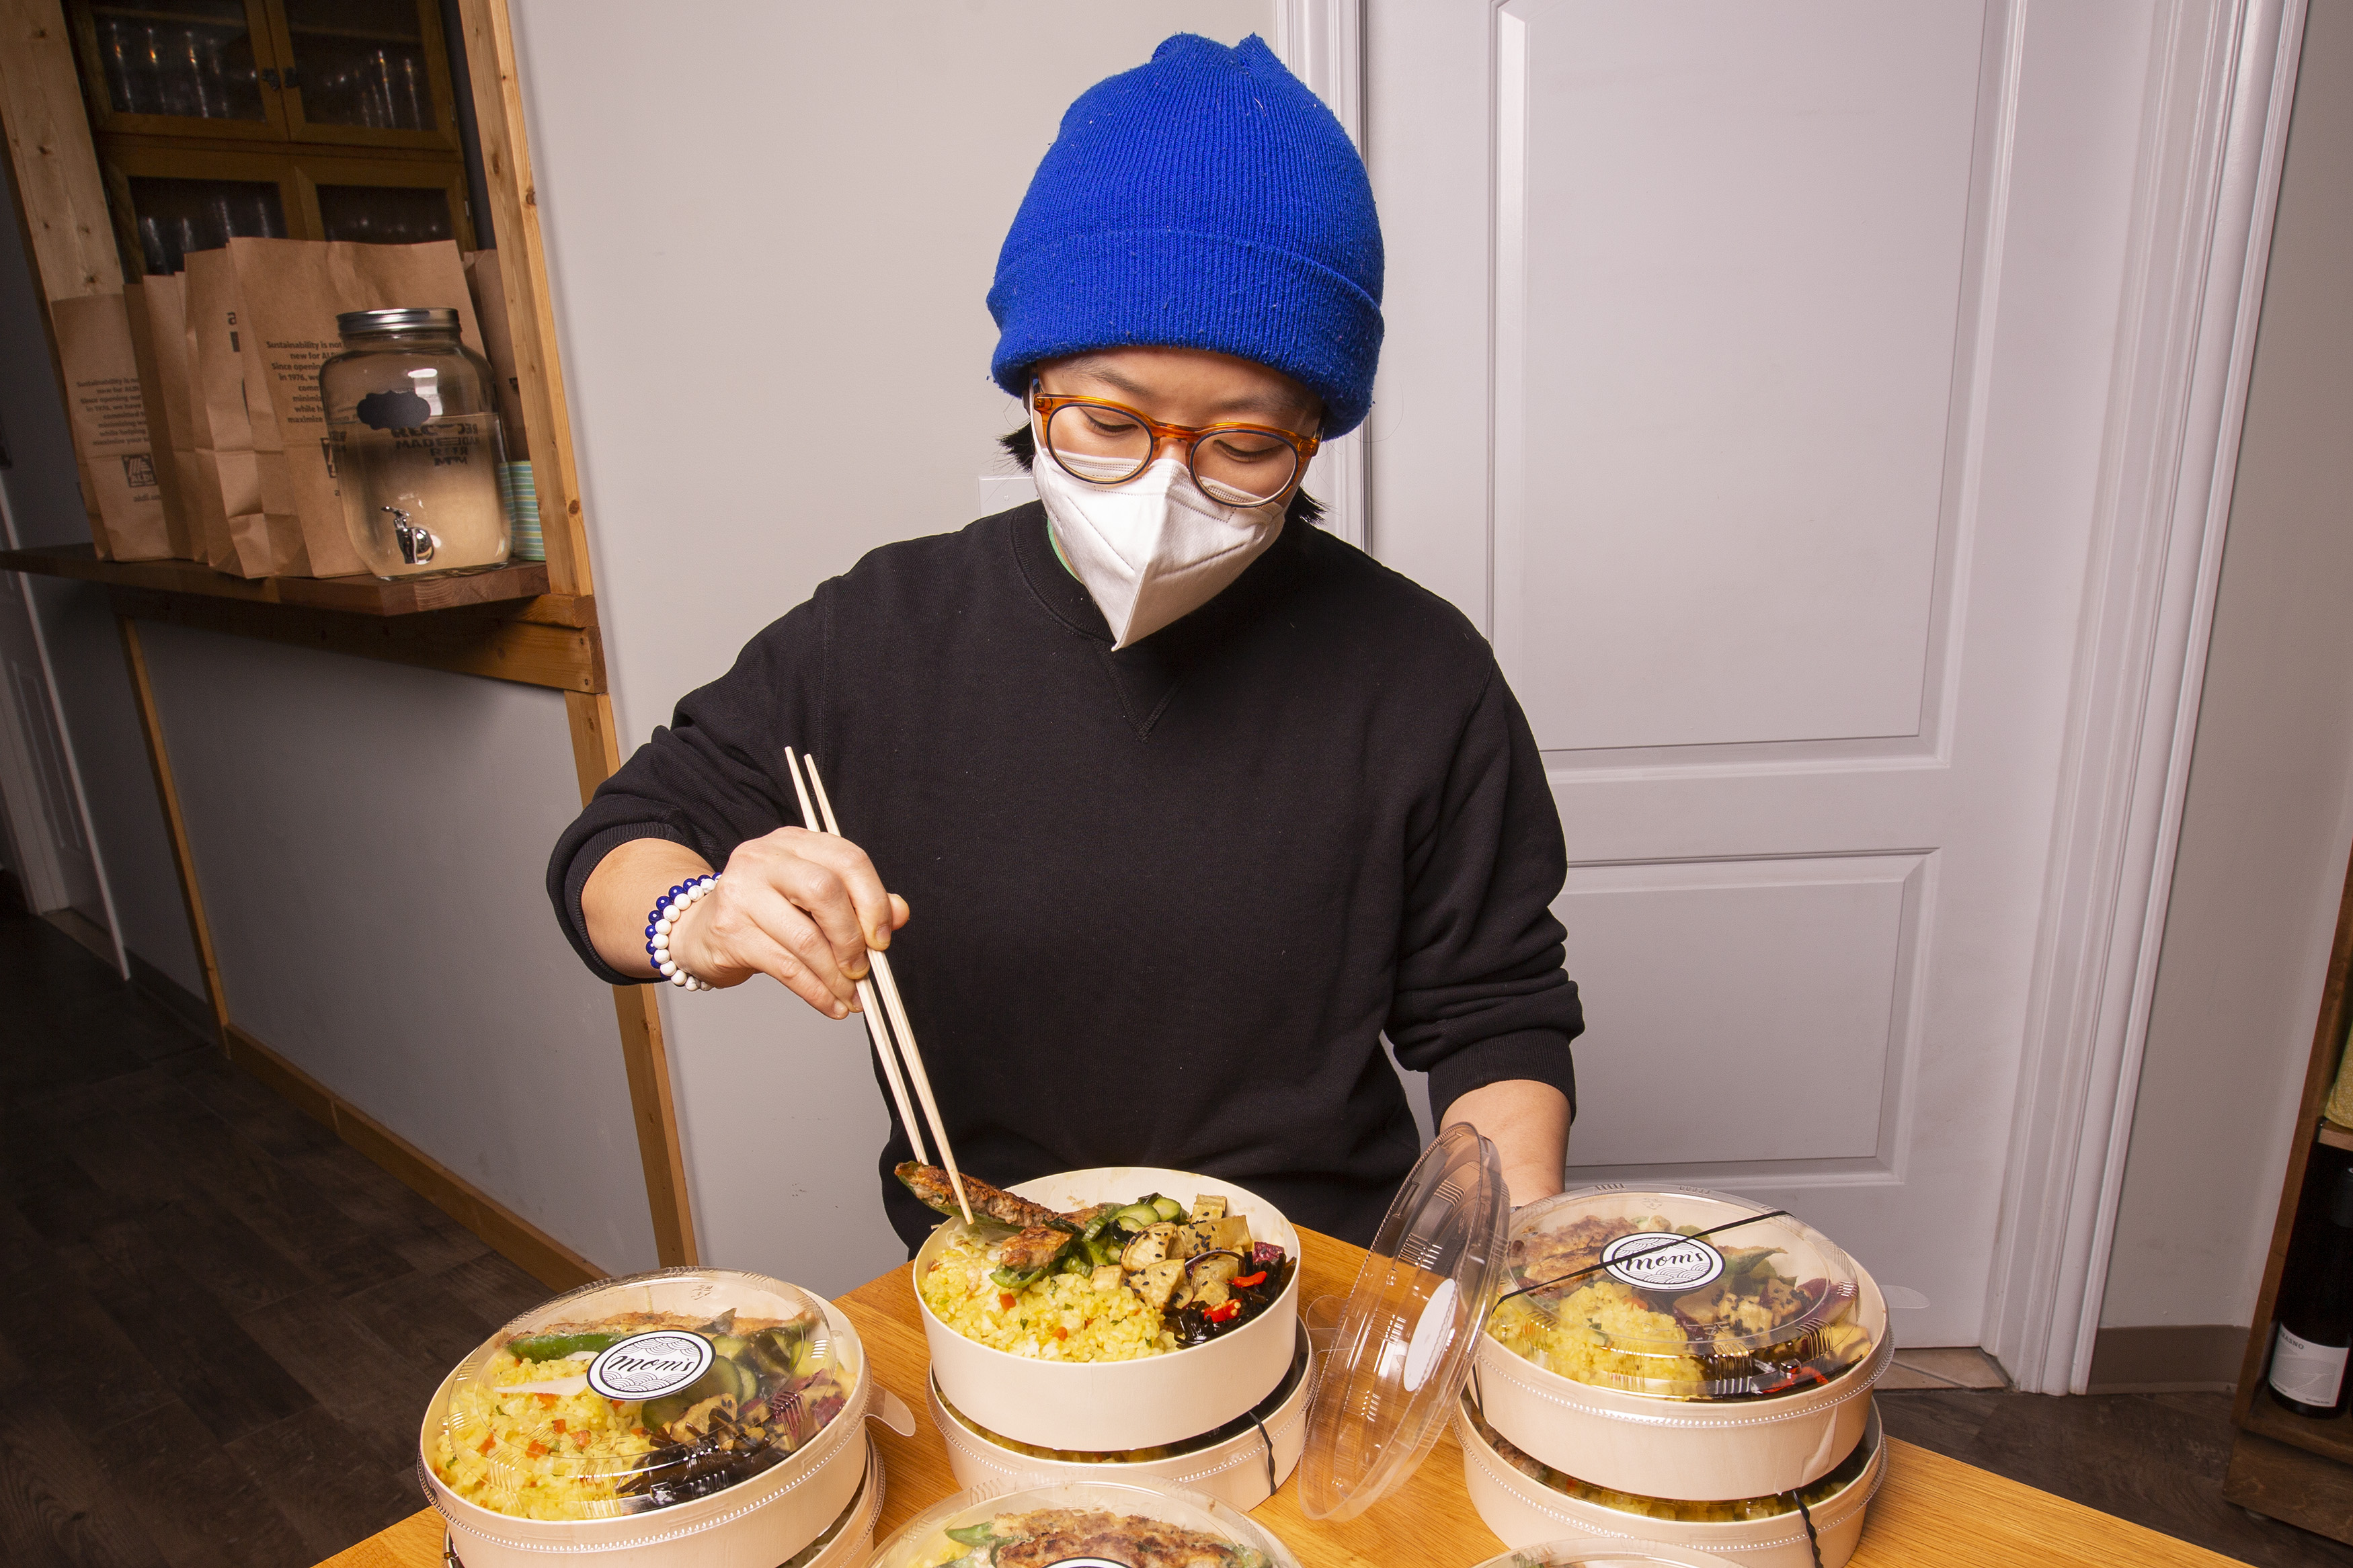 A chef wearing a white mask and blue beanie hat uses chopsticks to arrange food in a round bento box.